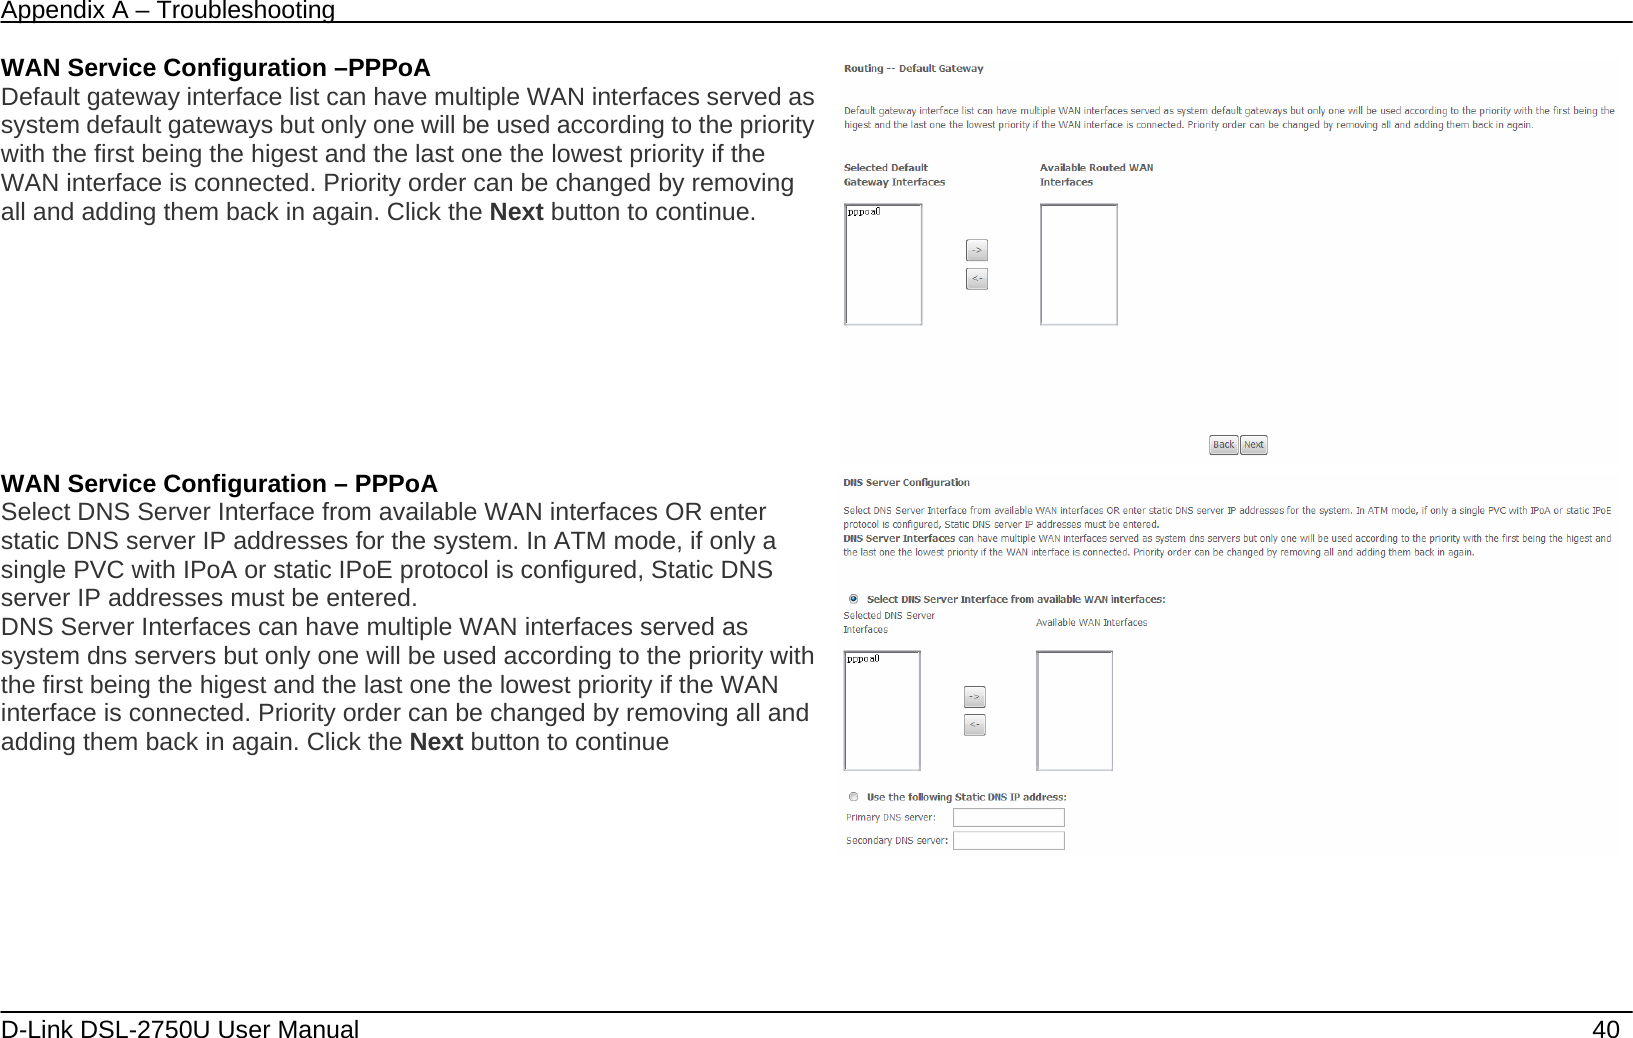 Appendix A – Troubleshooting   D-Link DSL-2750U User Manual    40 WAN Service Configuration –PPPoA Default gateway interface list can have multiple WAN interfaces served as system default gateways but only one will be used according to the priority with the first being the higest and the last one the lowest priority if the WAN interface is connected. Priority order can be changed by removing all and adding them back in again. Click the Next button to continue.  WAN Service Configuration – PPPoA Select DNS Server Interface from available WAN interfaces OR enter static DNS server IP addresses for the system. In ATM mode, if only a single PVC with IPoA or static IPoE protocol is configured, Static DNS server IP addresses must be entered. DNS Server Interfaces can have multiple WAN interfaces served as system dns servers but only one will be used according to the priority with the first being the higest and the last one the lowest priority if the WAN interface is connected. Priority order can be changed by removing all and adding them back in again. Click the Next button to continue         